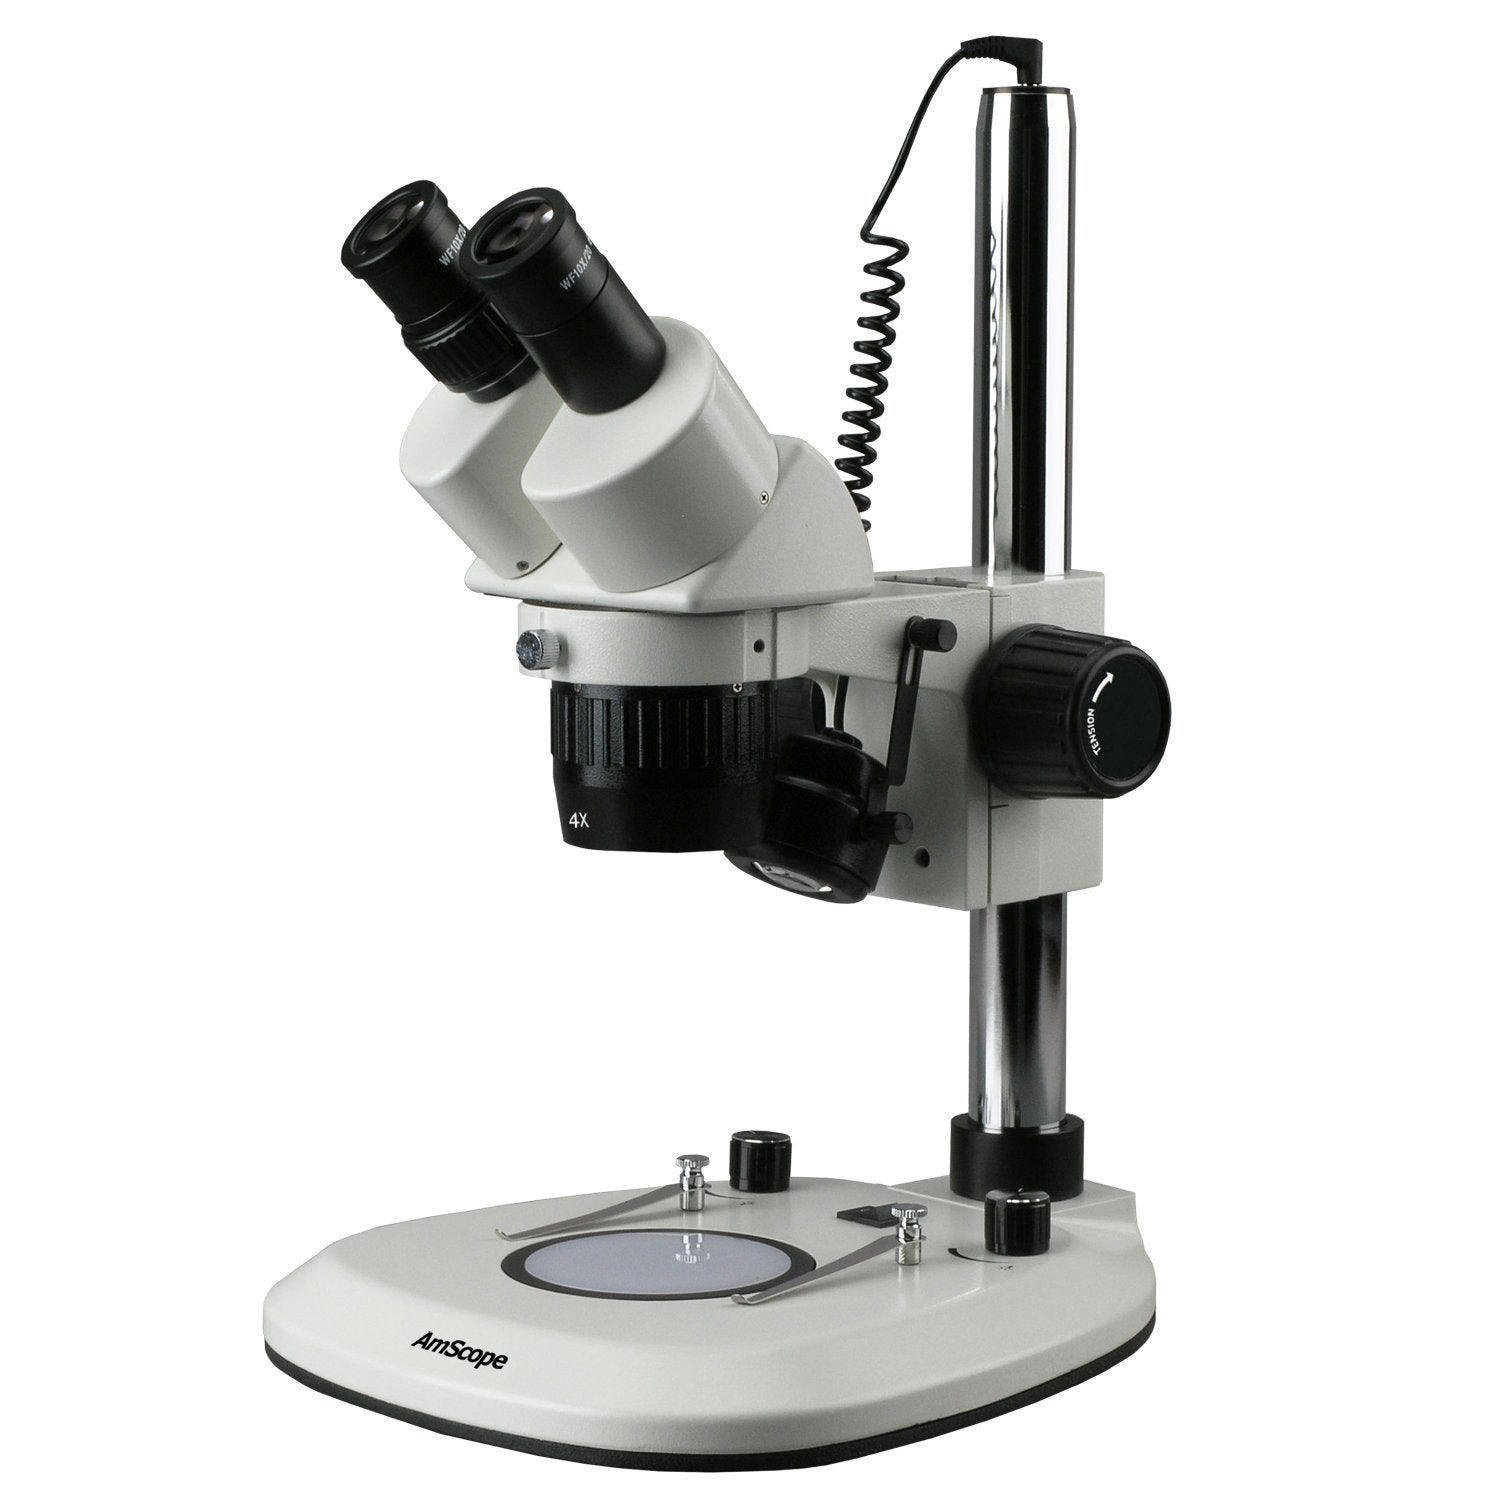 AmScope 20X-40X Super Widefield Pillar Stand Stereo Microscope with Top & Bottom LED Lights